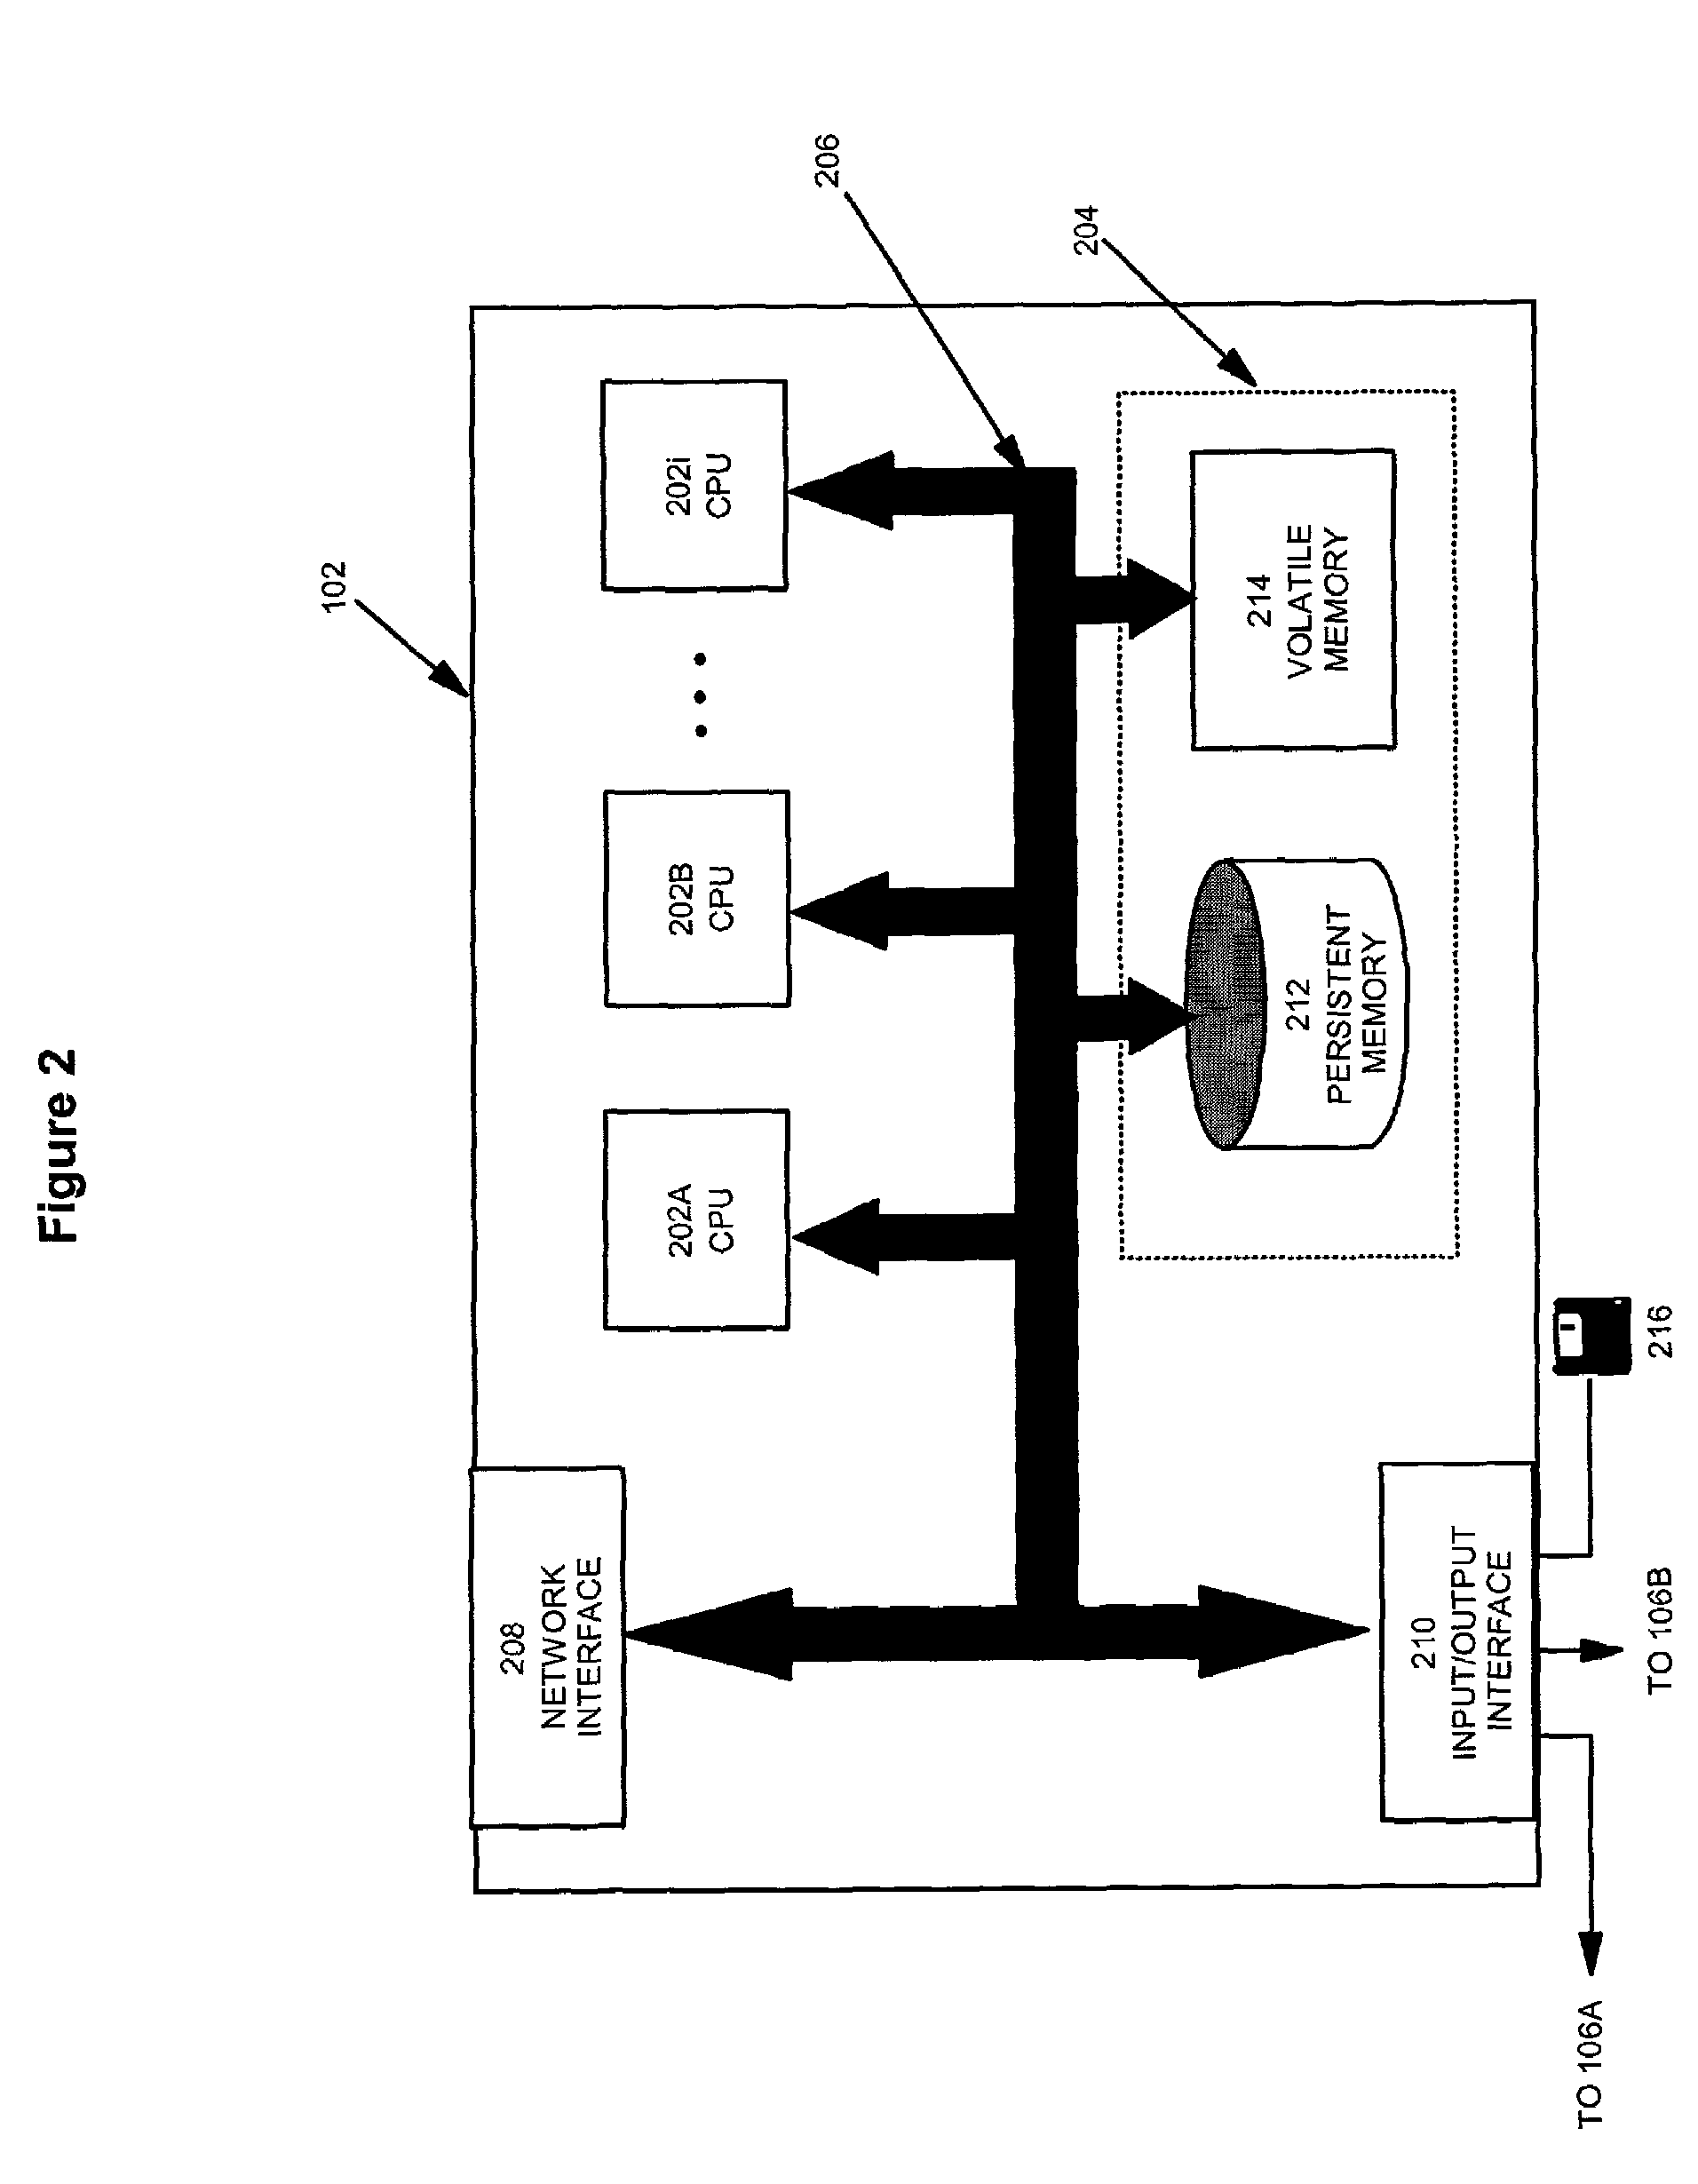 Method and system for cross platform, parallel processing